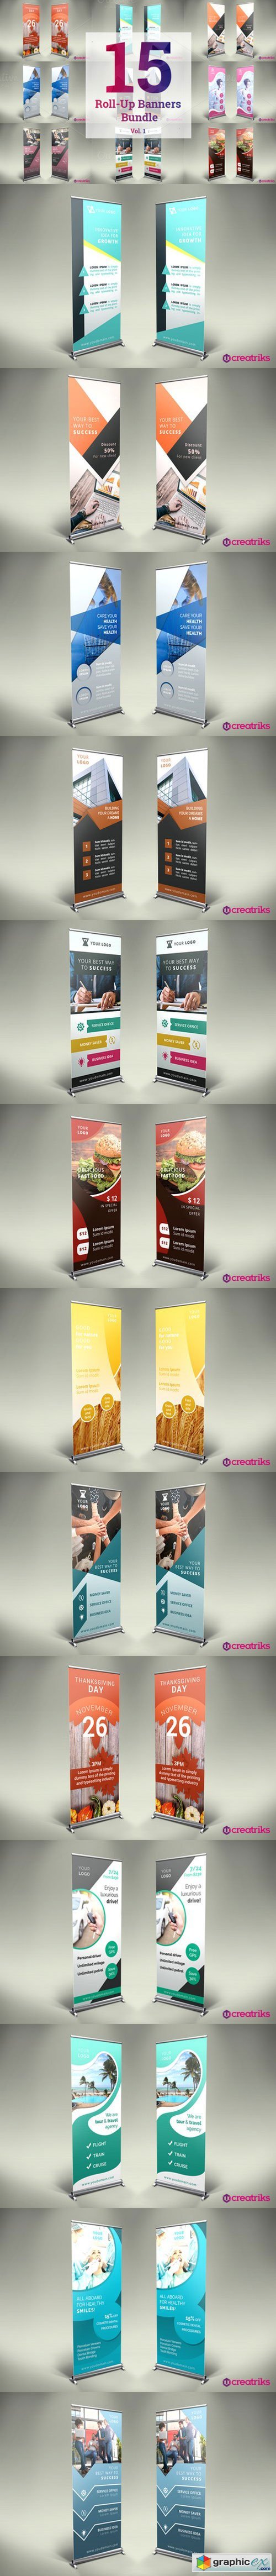 15 Roll-Up Banners Bundle vol.1